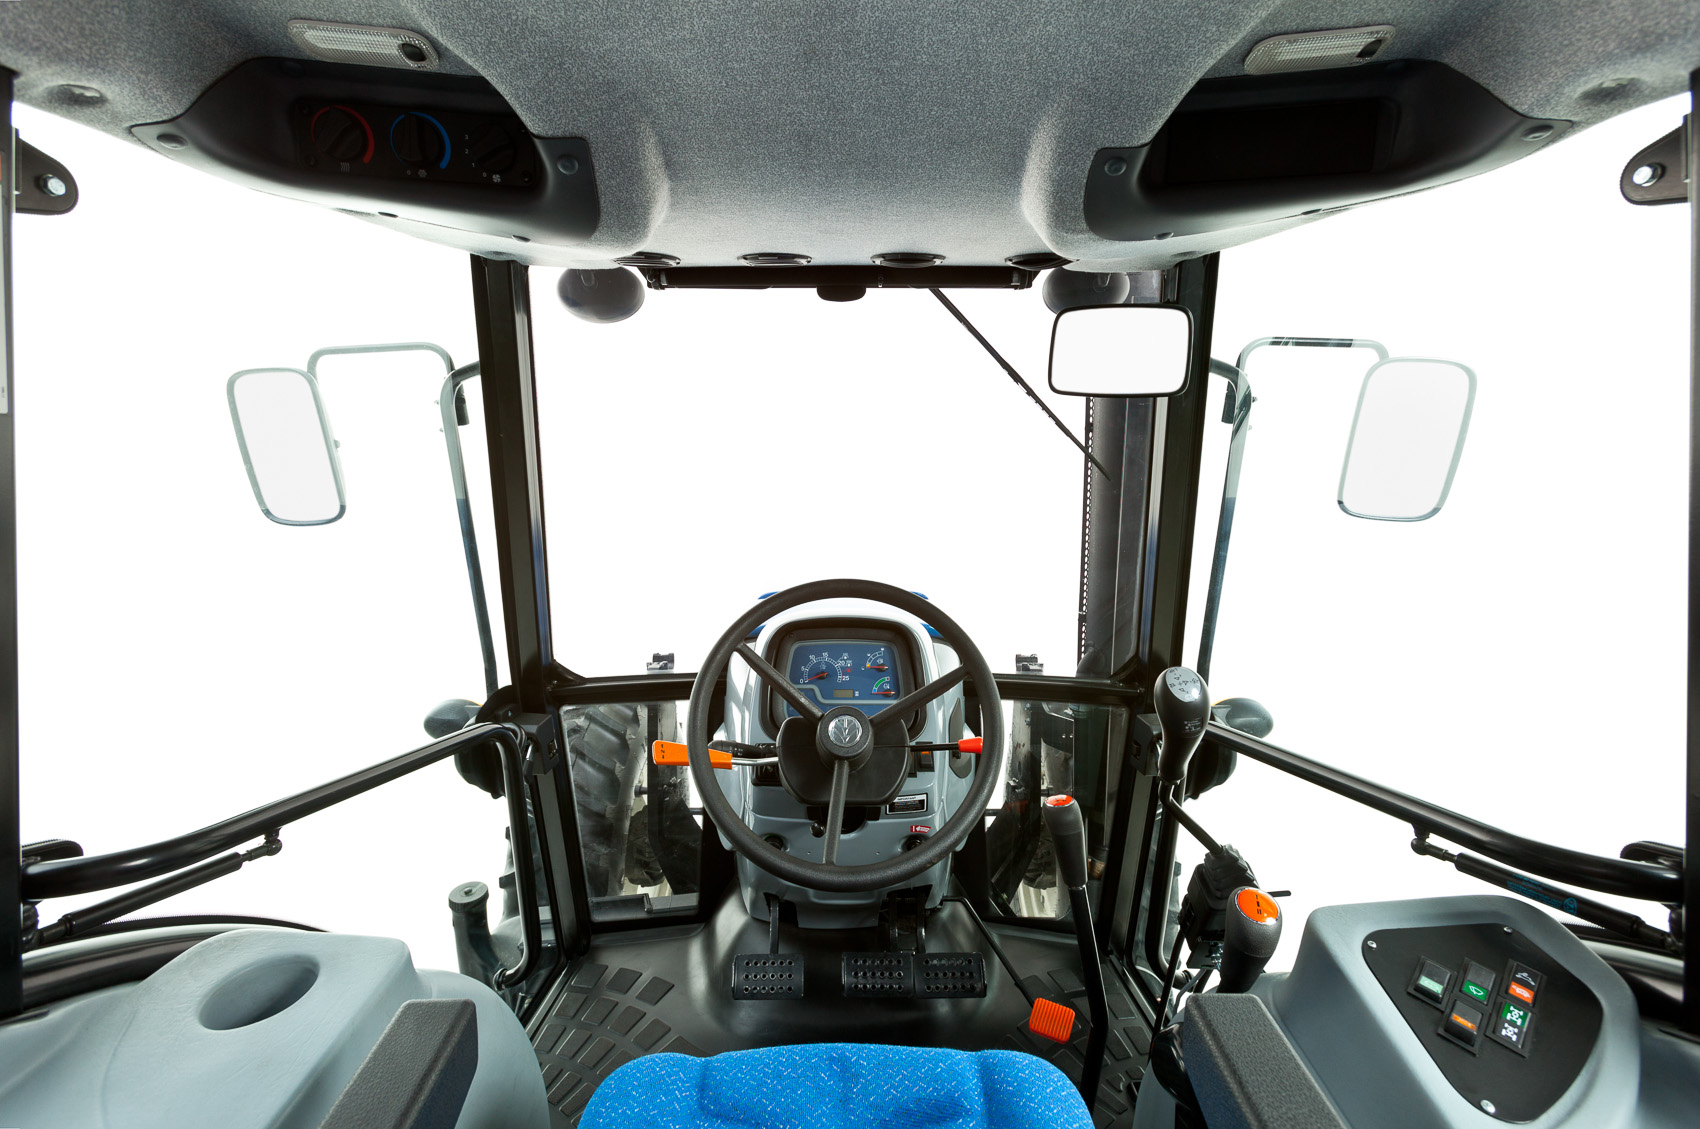 New Holland TS6.140 DualPower Tractor Cab Interior | J. Eldon Zimmerman Photography | Lancaster, PA Agriculture Photographer